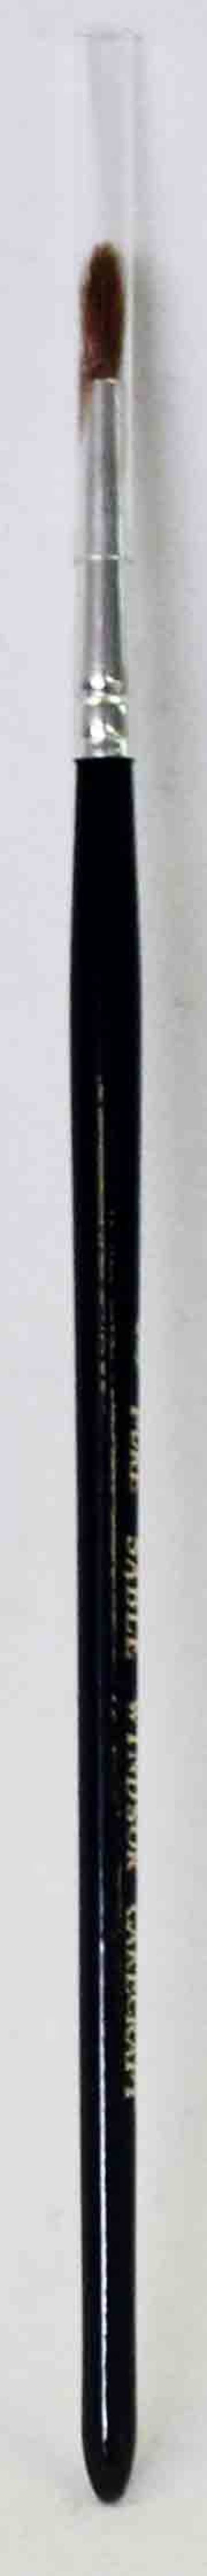 Buy Craft Brush - Sable - Size 3 in NZ. 